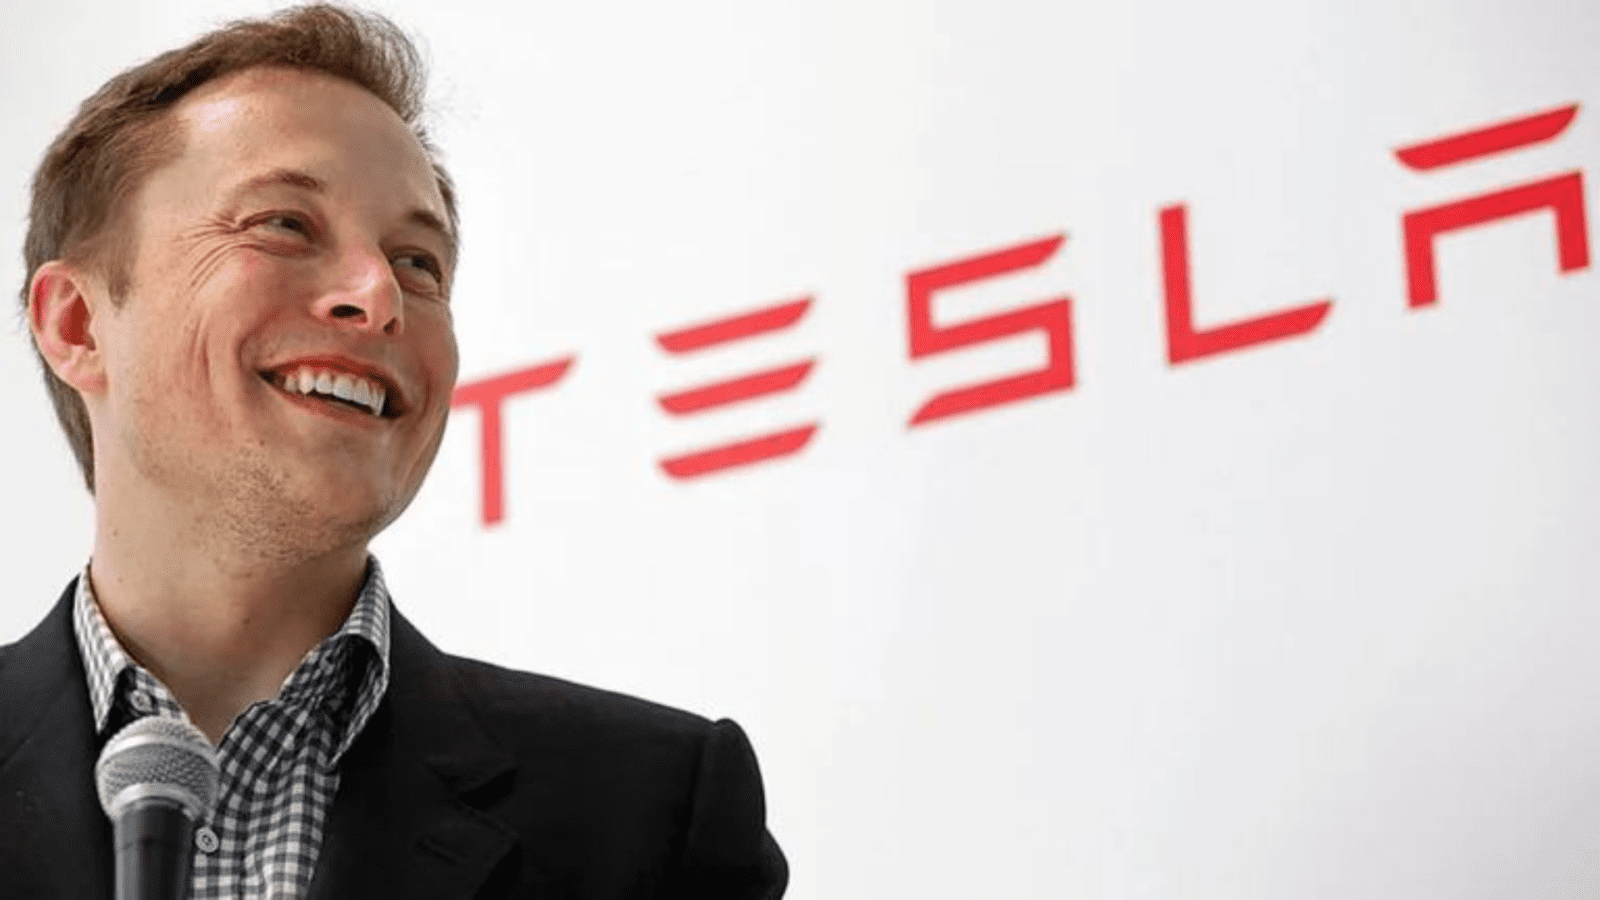 Elon Musk To Reveal Tesla's "Robotaxi" On August 8